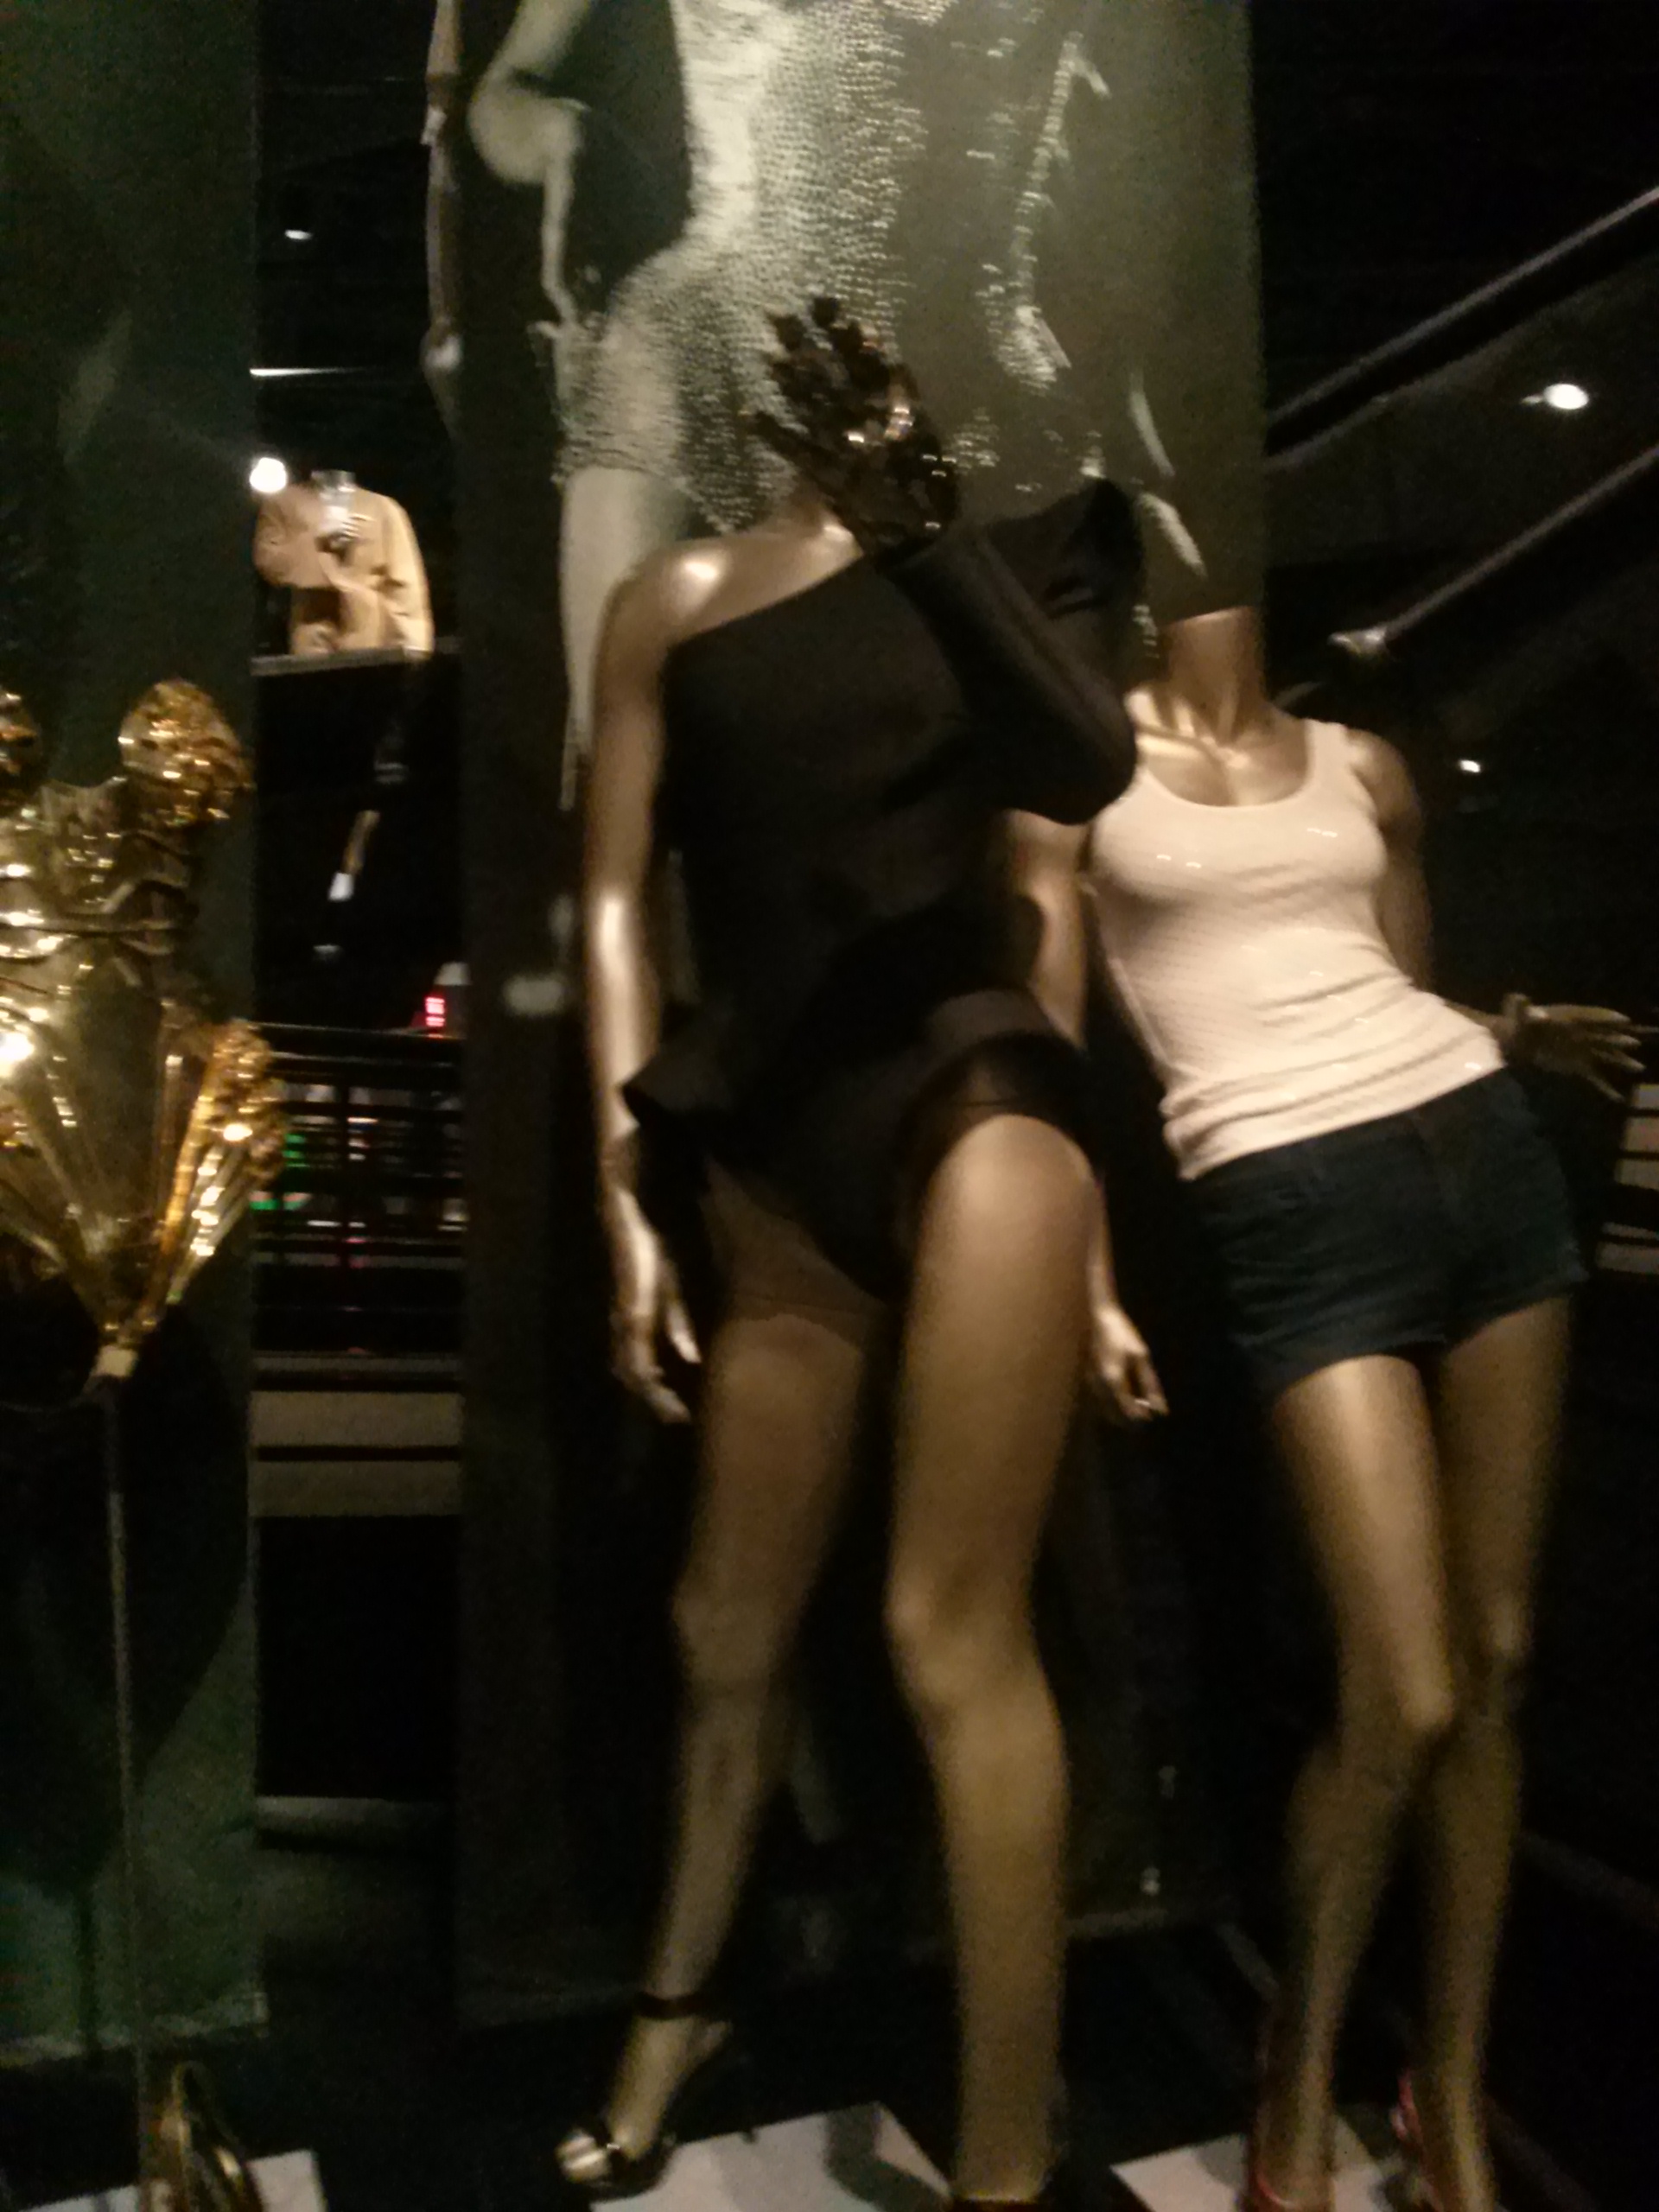 Photograph: Beyoncé's outfits, with a gold bathing suit-like outfit, a black bathing suit-like outfit on a mannequin with left hand raised in black glove with a ring on it, and another mannequin with short sleaved pink top and very short black mini-skirt.